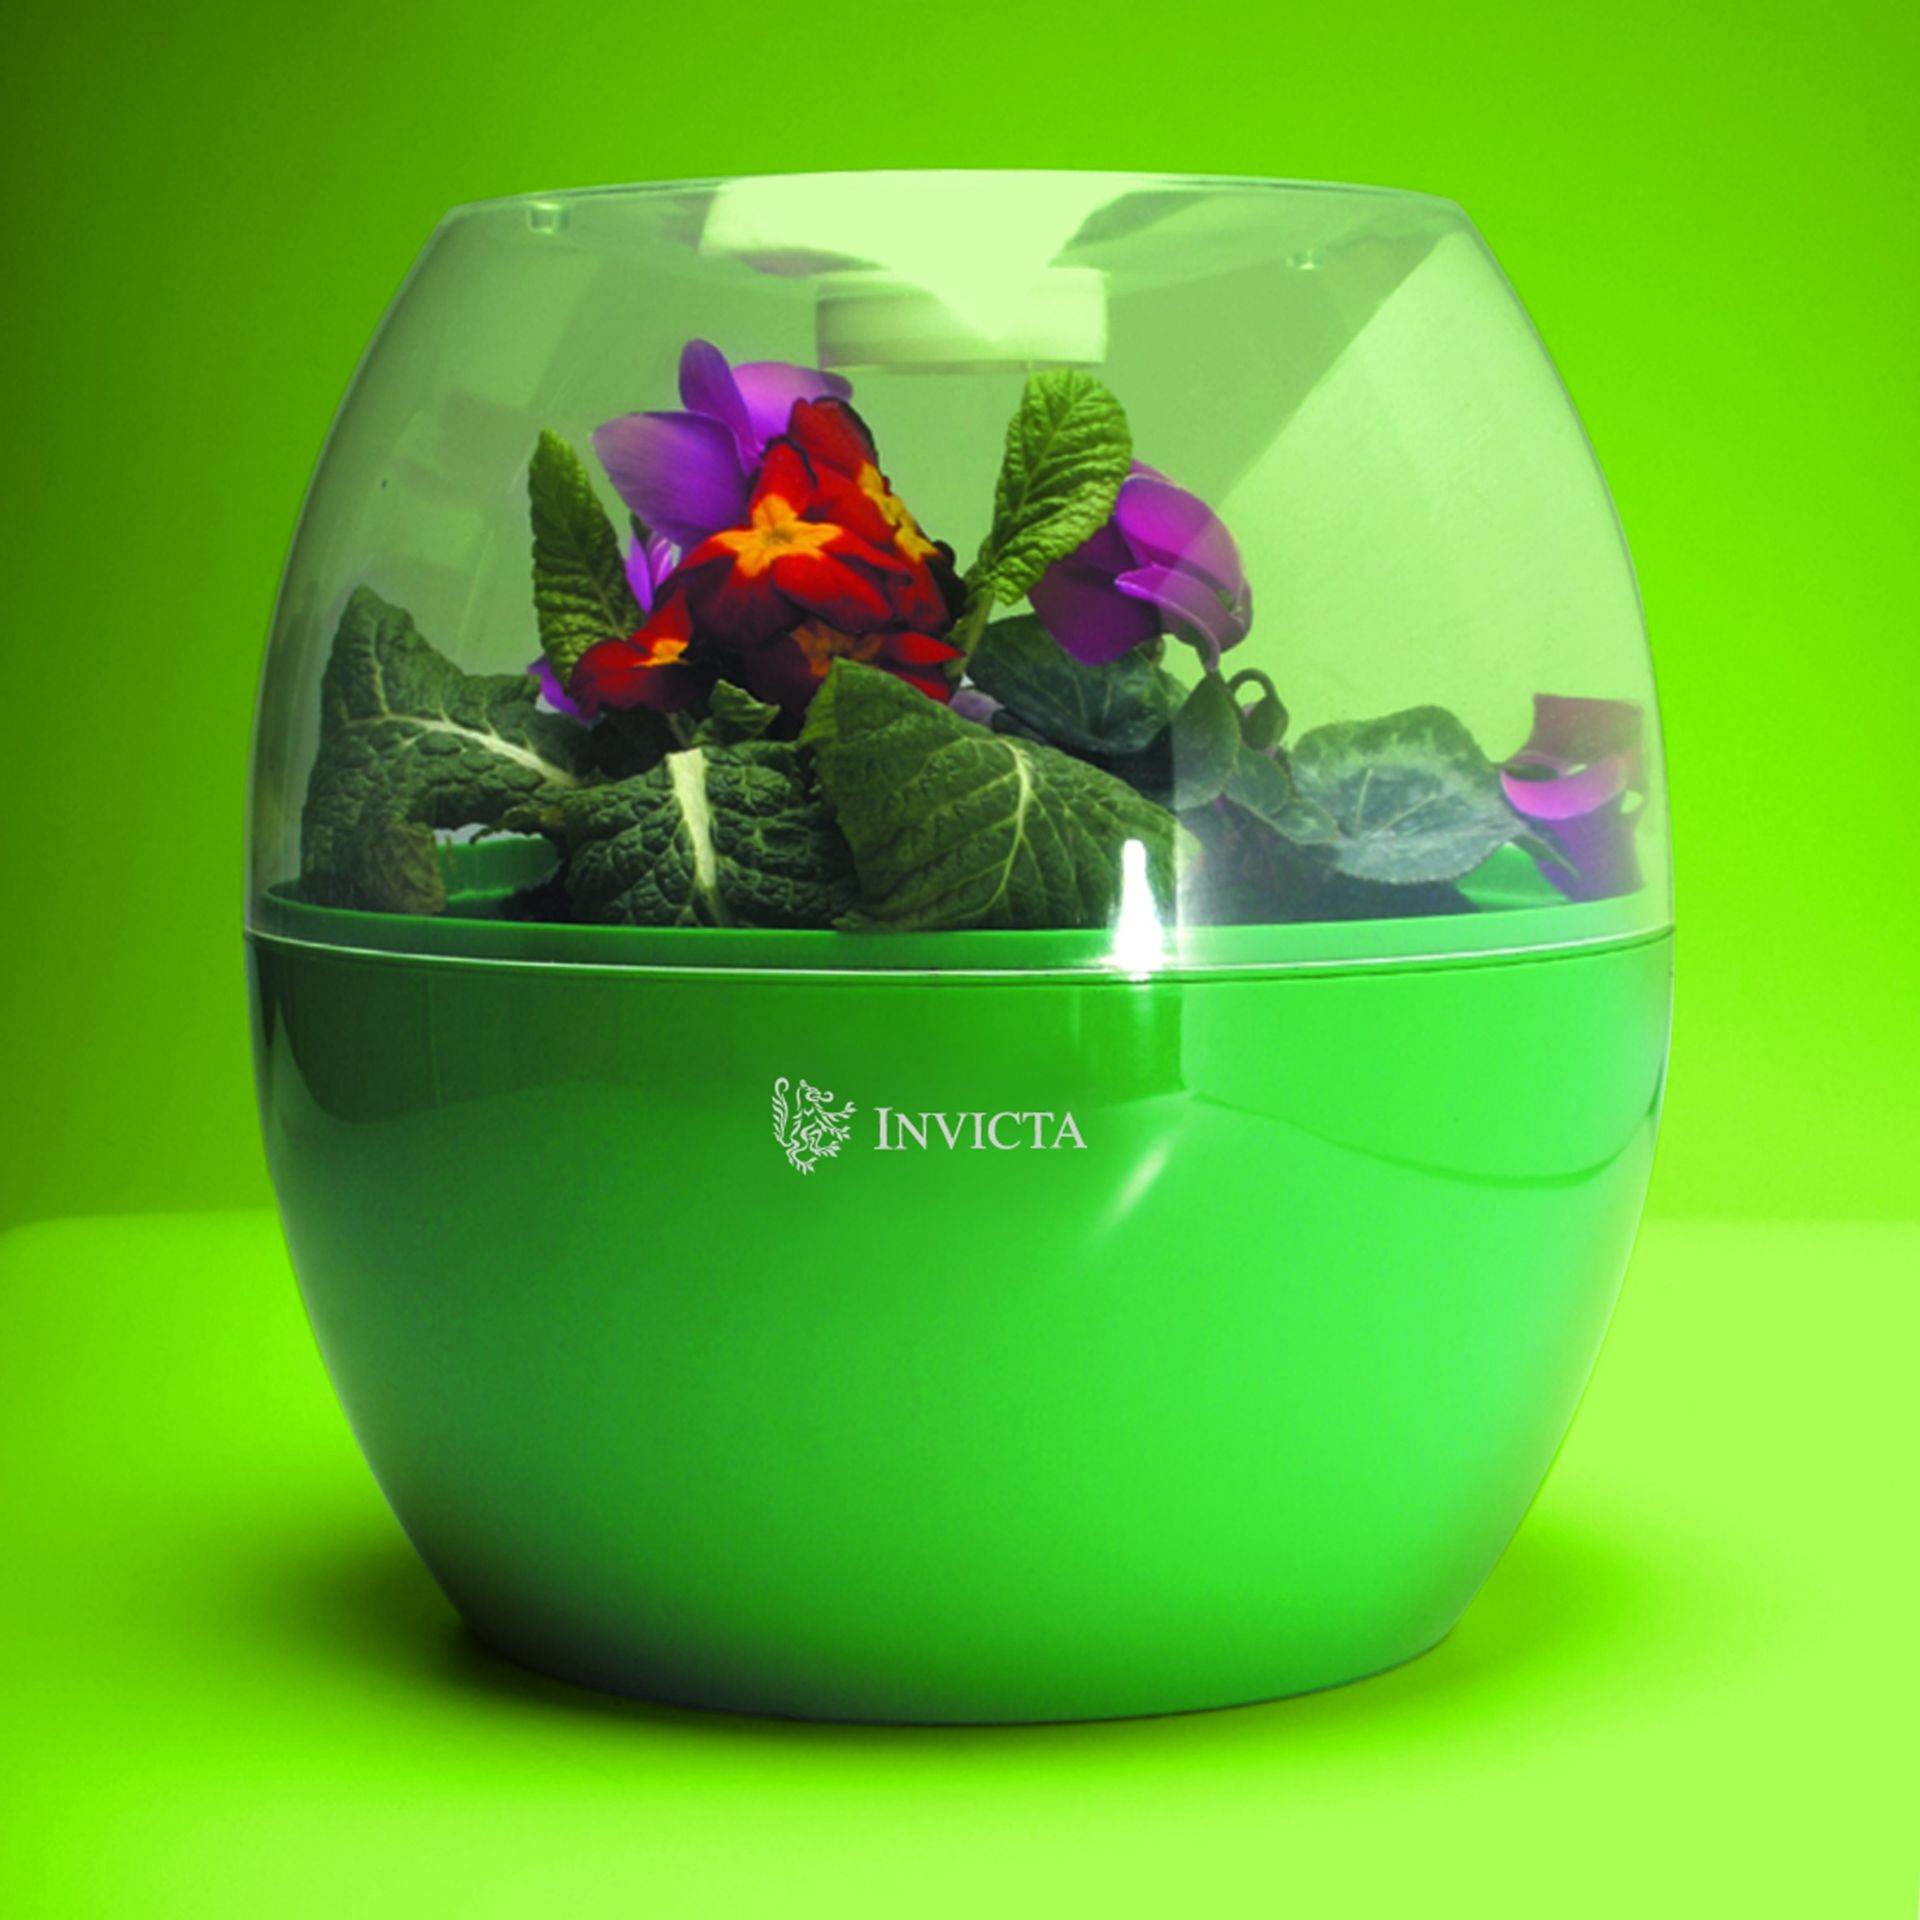 V *TRADE QTY* Brand New Invicta Grow Bell ISP £15.99 (Supplies For Schools) X 5 YOUR BID PRICE TO BE